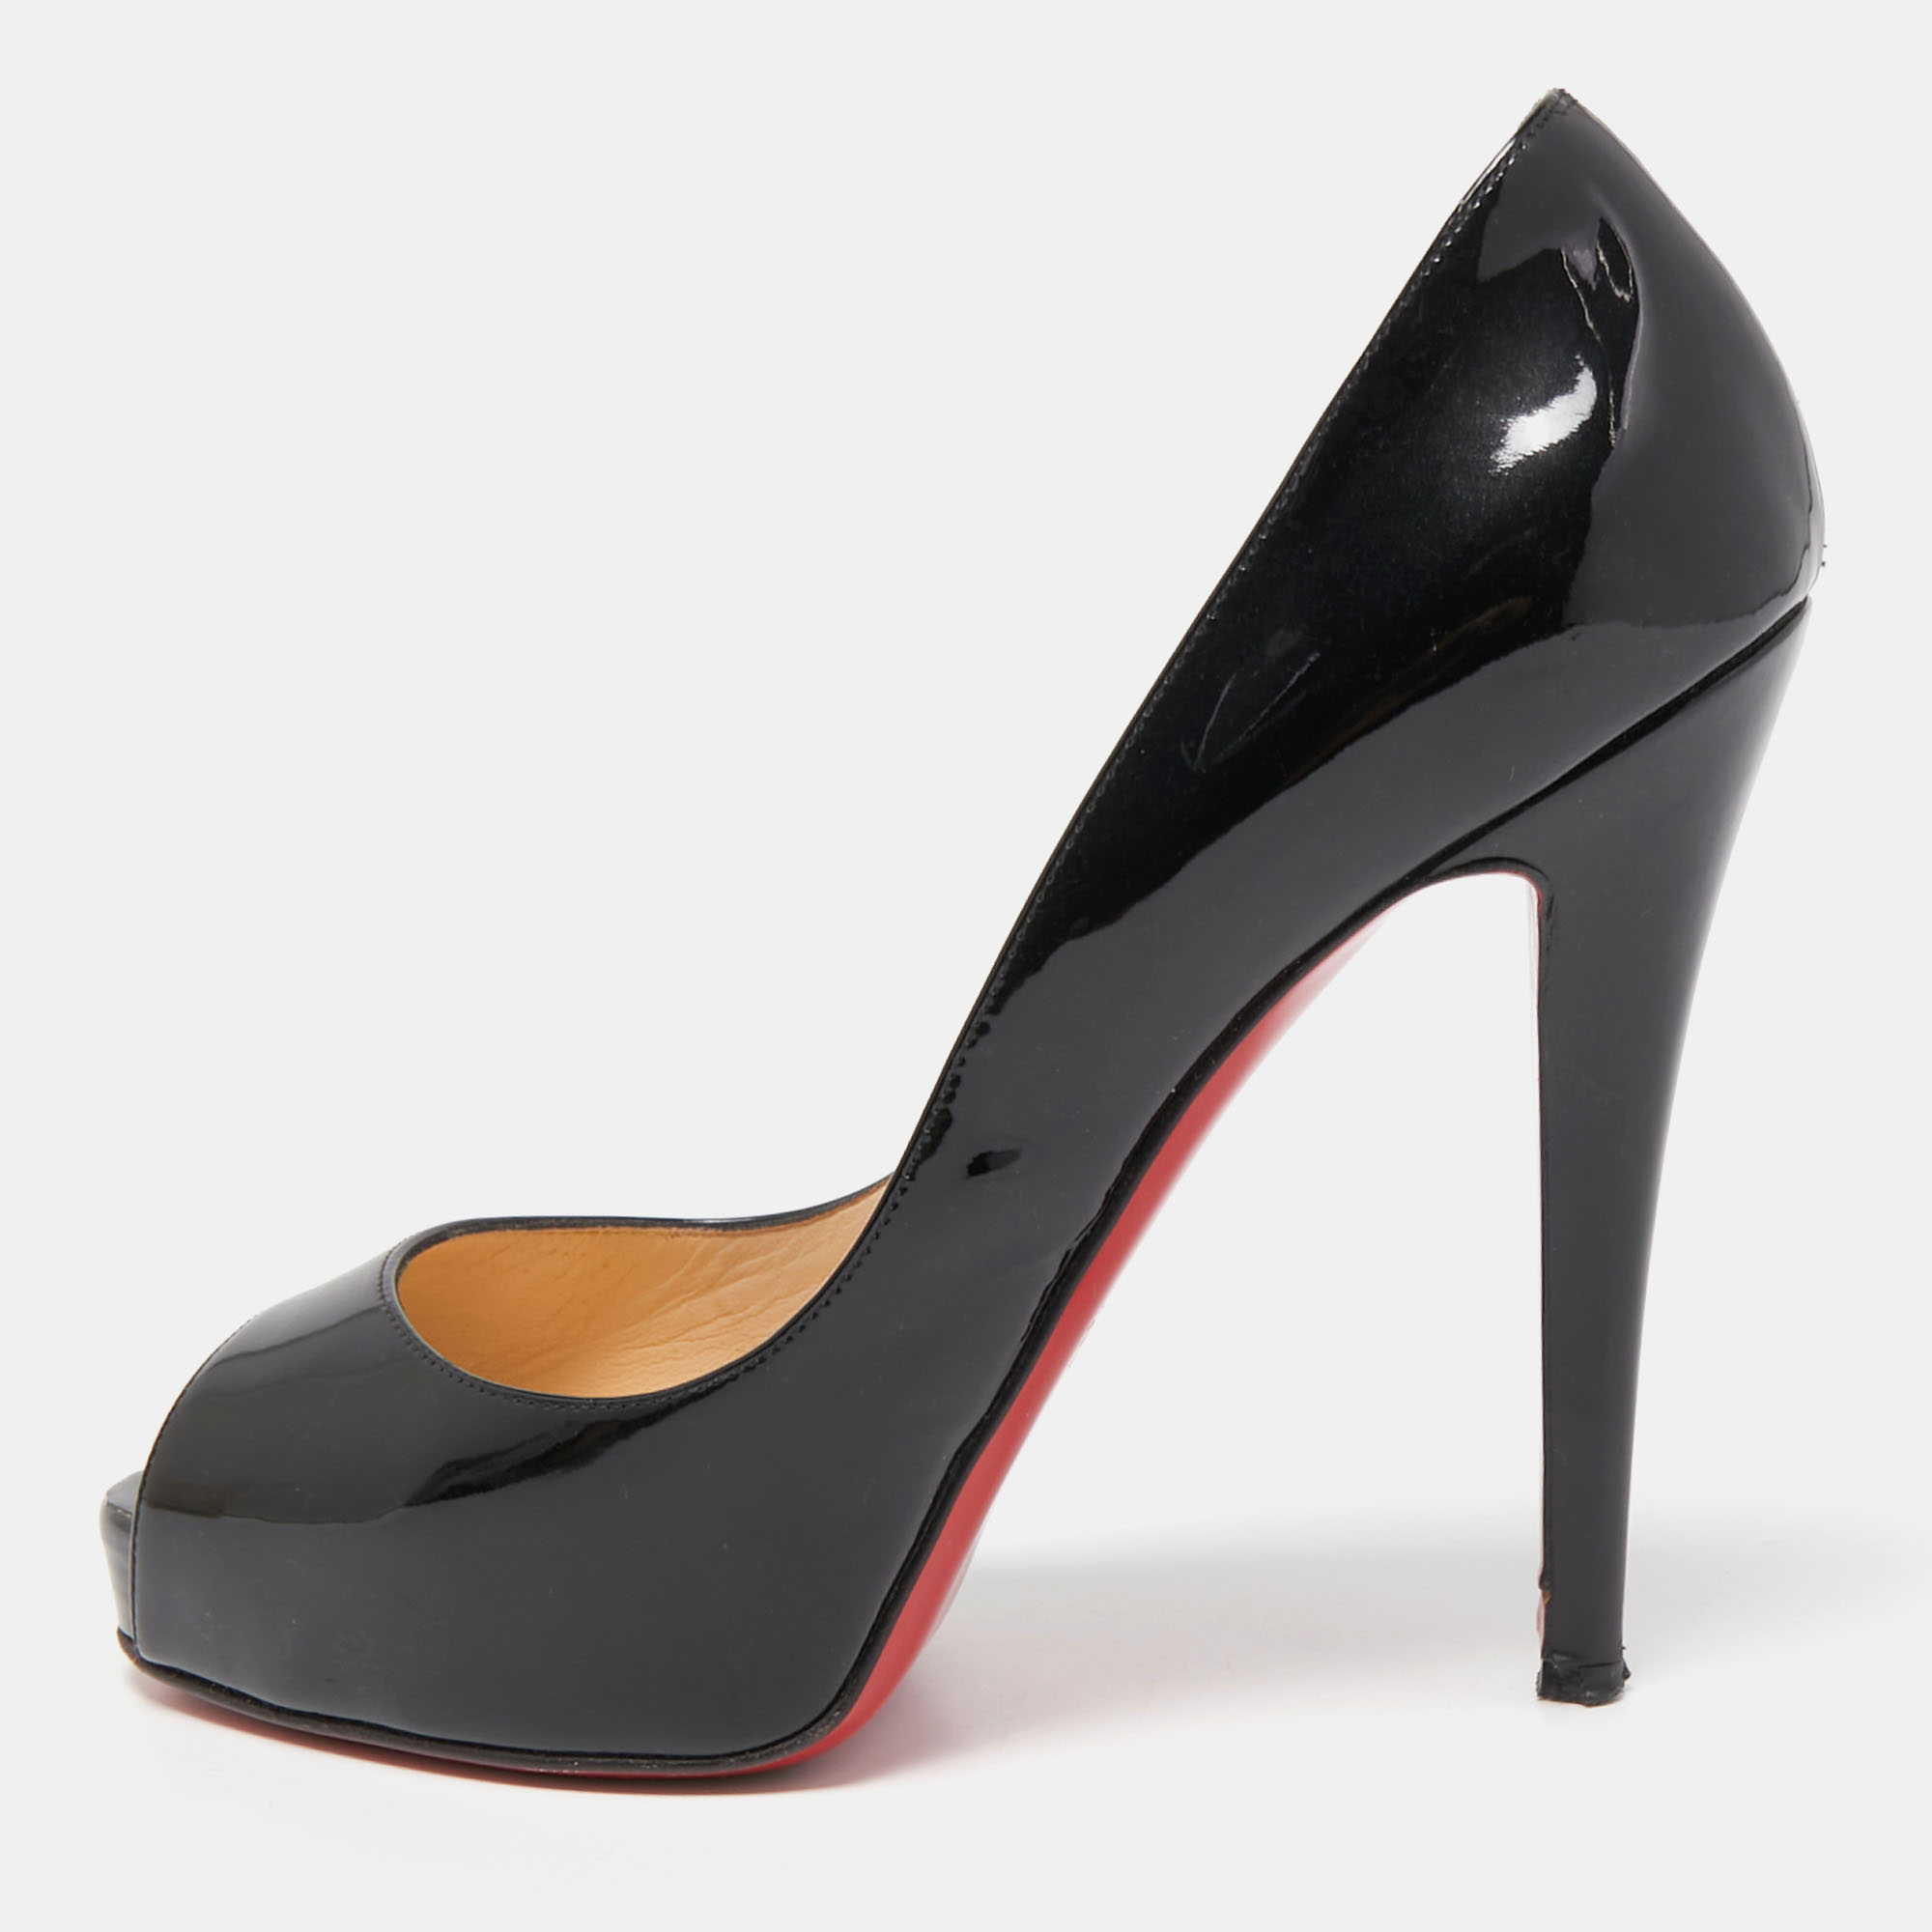 Christian Louboutin Black Patent Leather Very Prive Pumps Size 37